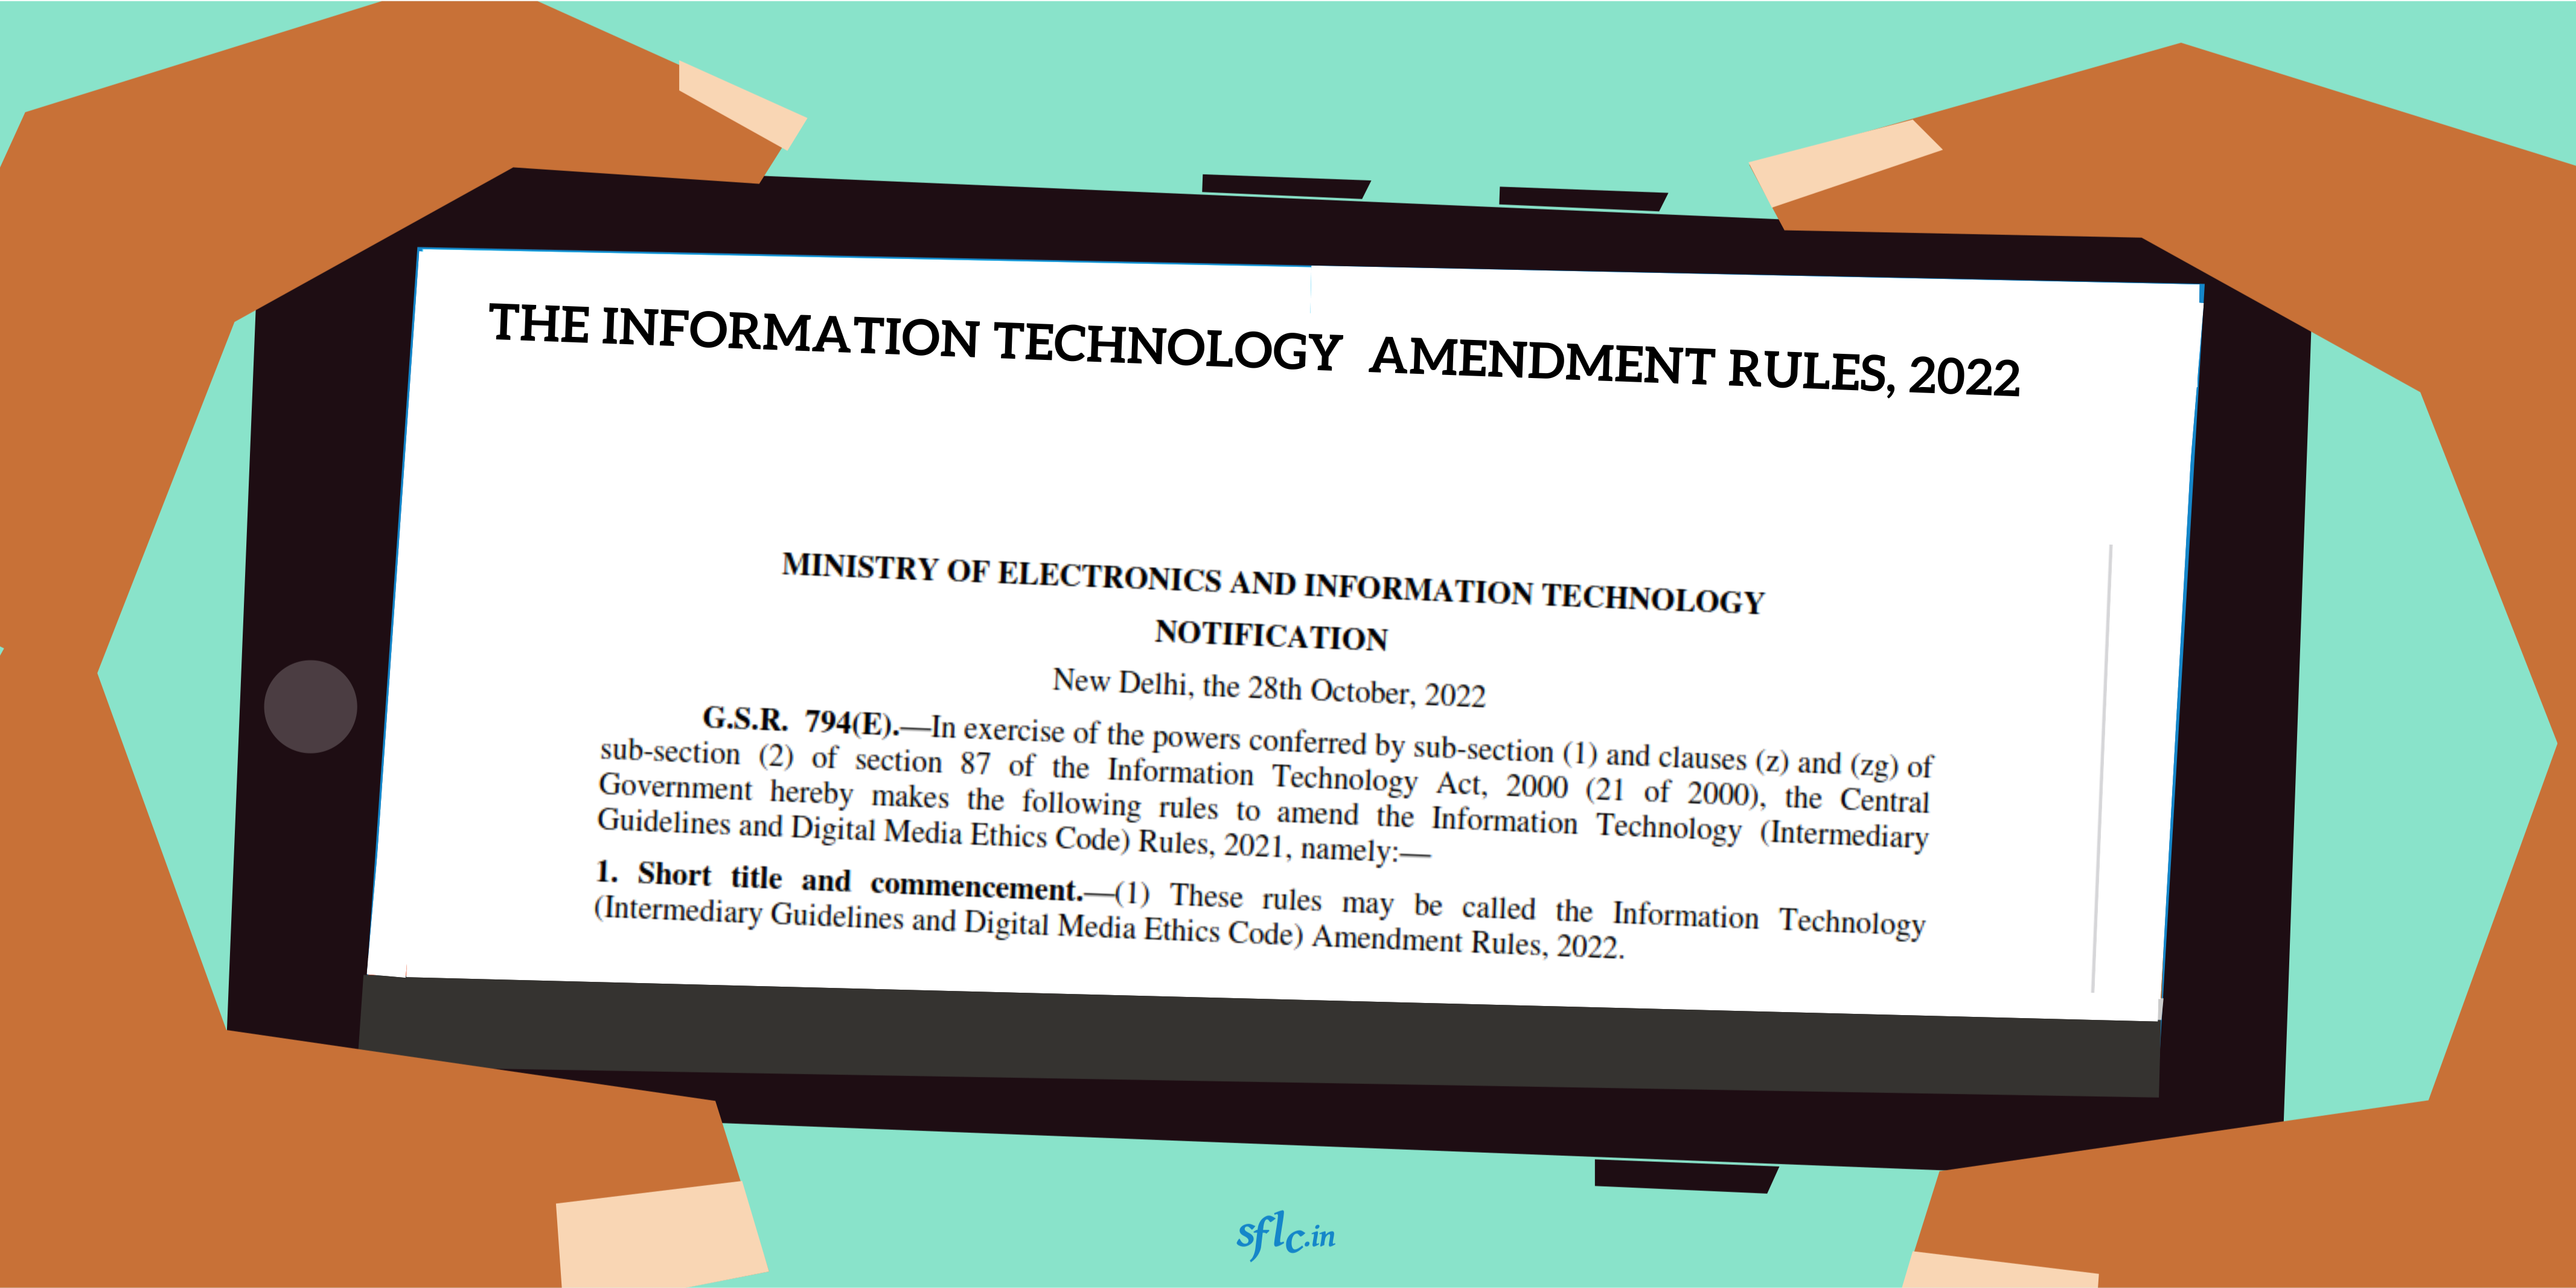 The Information Technology (Intermediary Guidelines and Digital Media Ethics Code) Amendment Rules, 2022